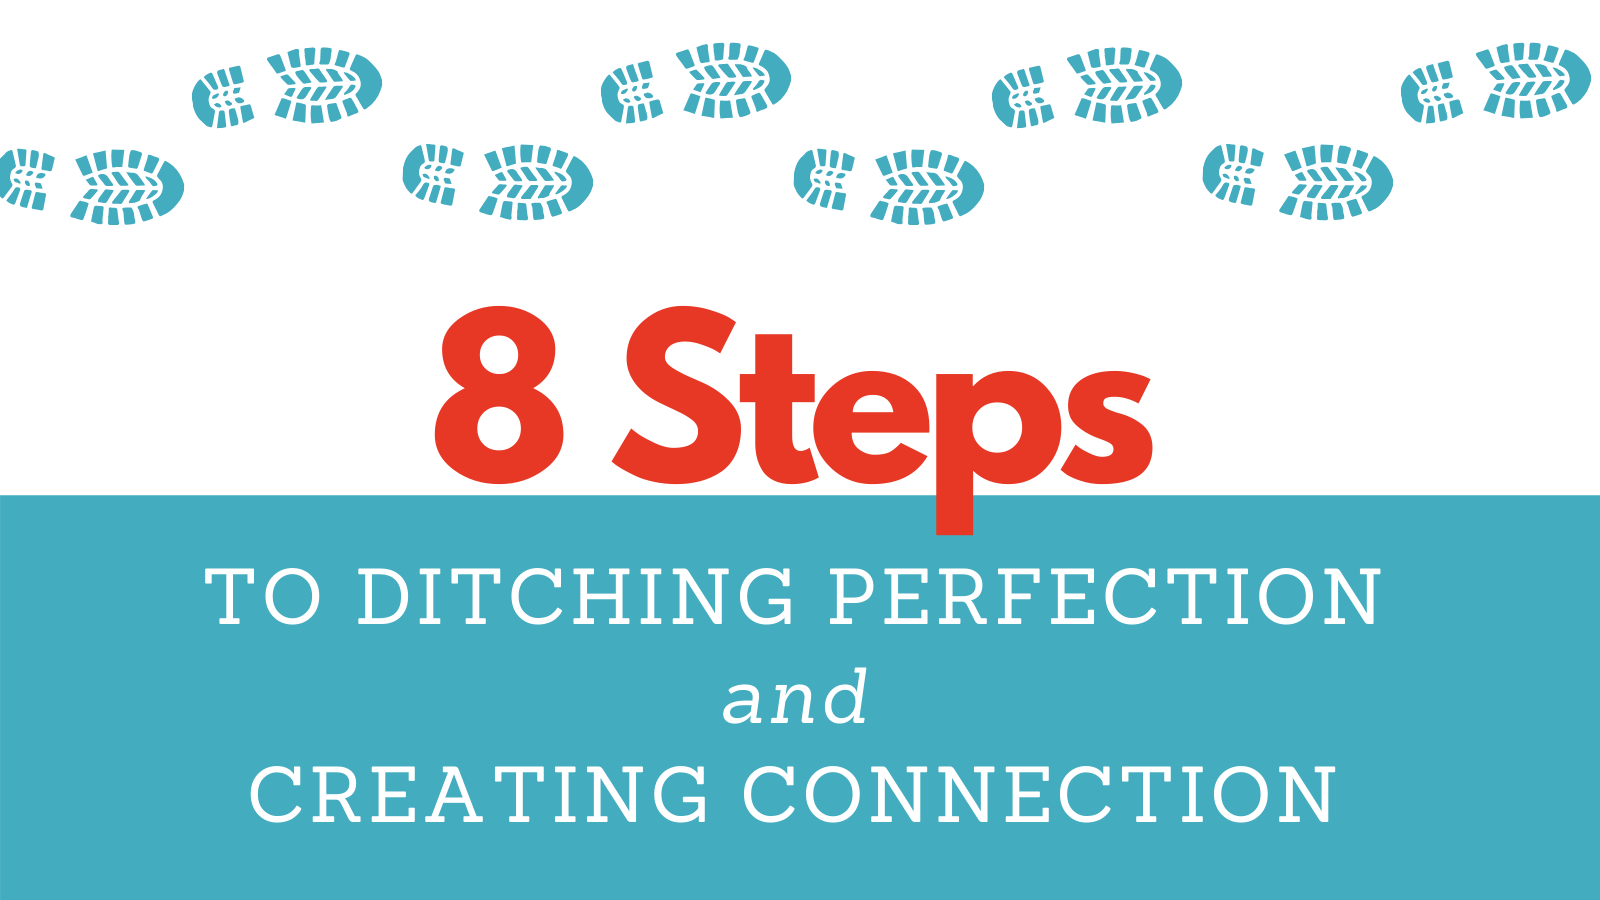 8 Steps to Ditching Perfection and Creating Connection